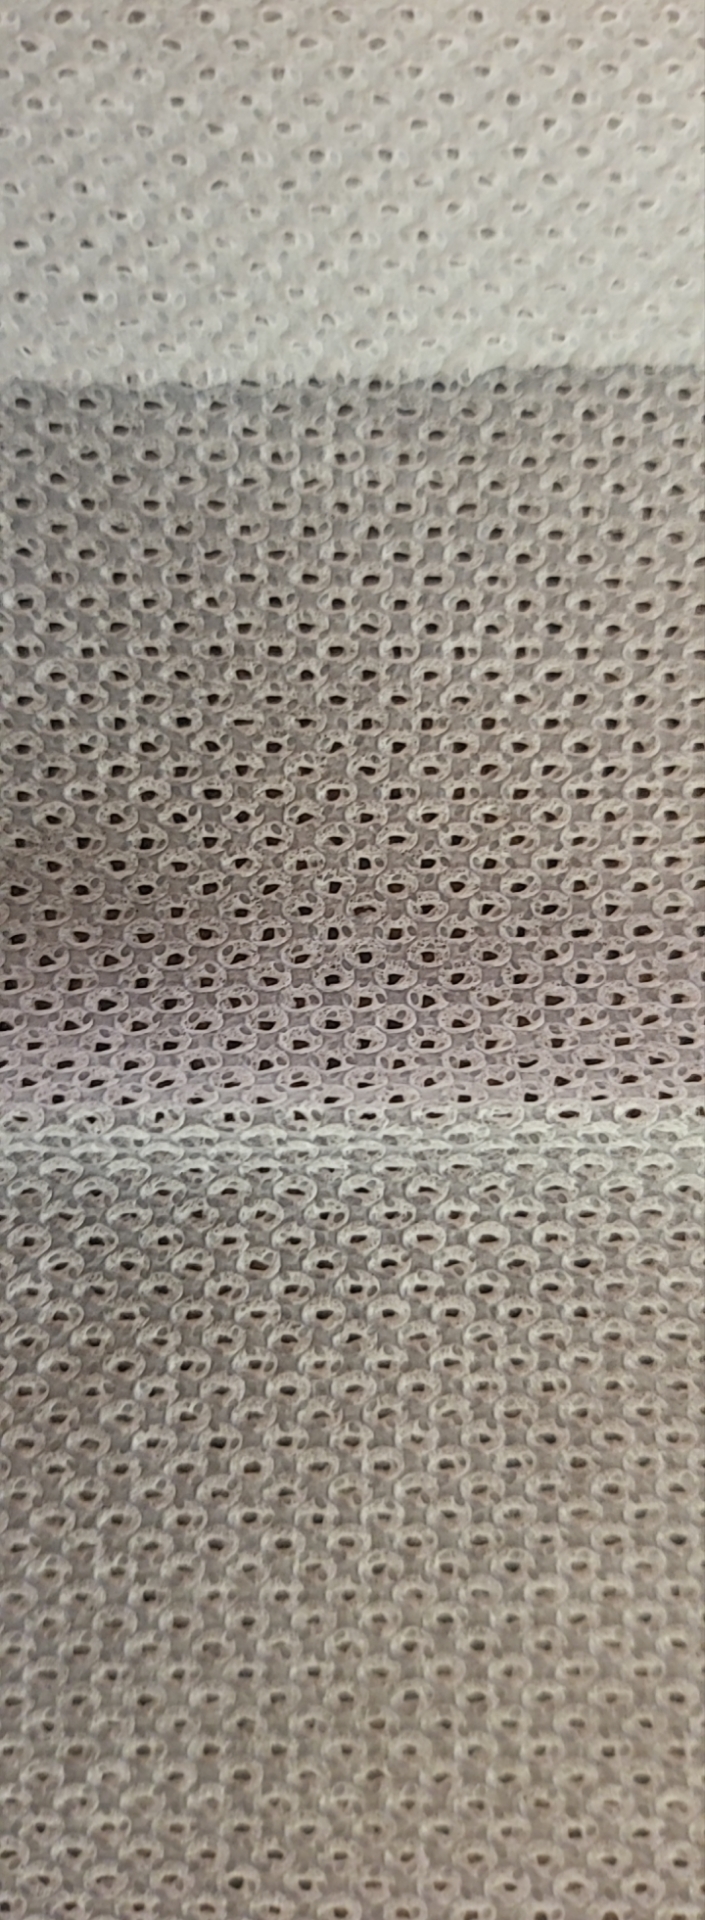 perforated nonwoven fabric